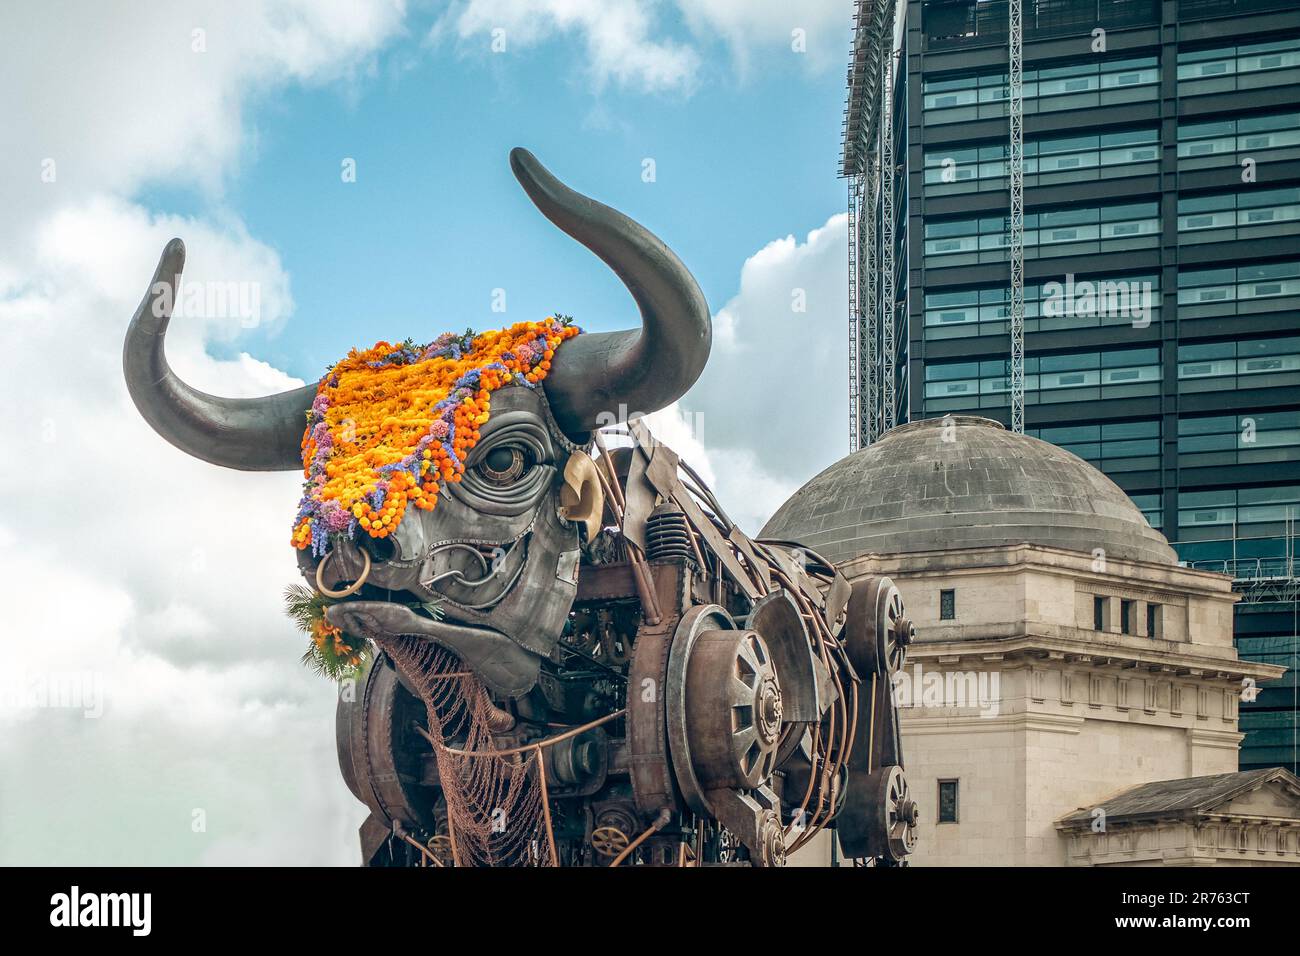 The iconic giant metal bull that was first seen at the Birmingham Commonwealth games has its head covered with flowers during the Polinations event. Stock Photo